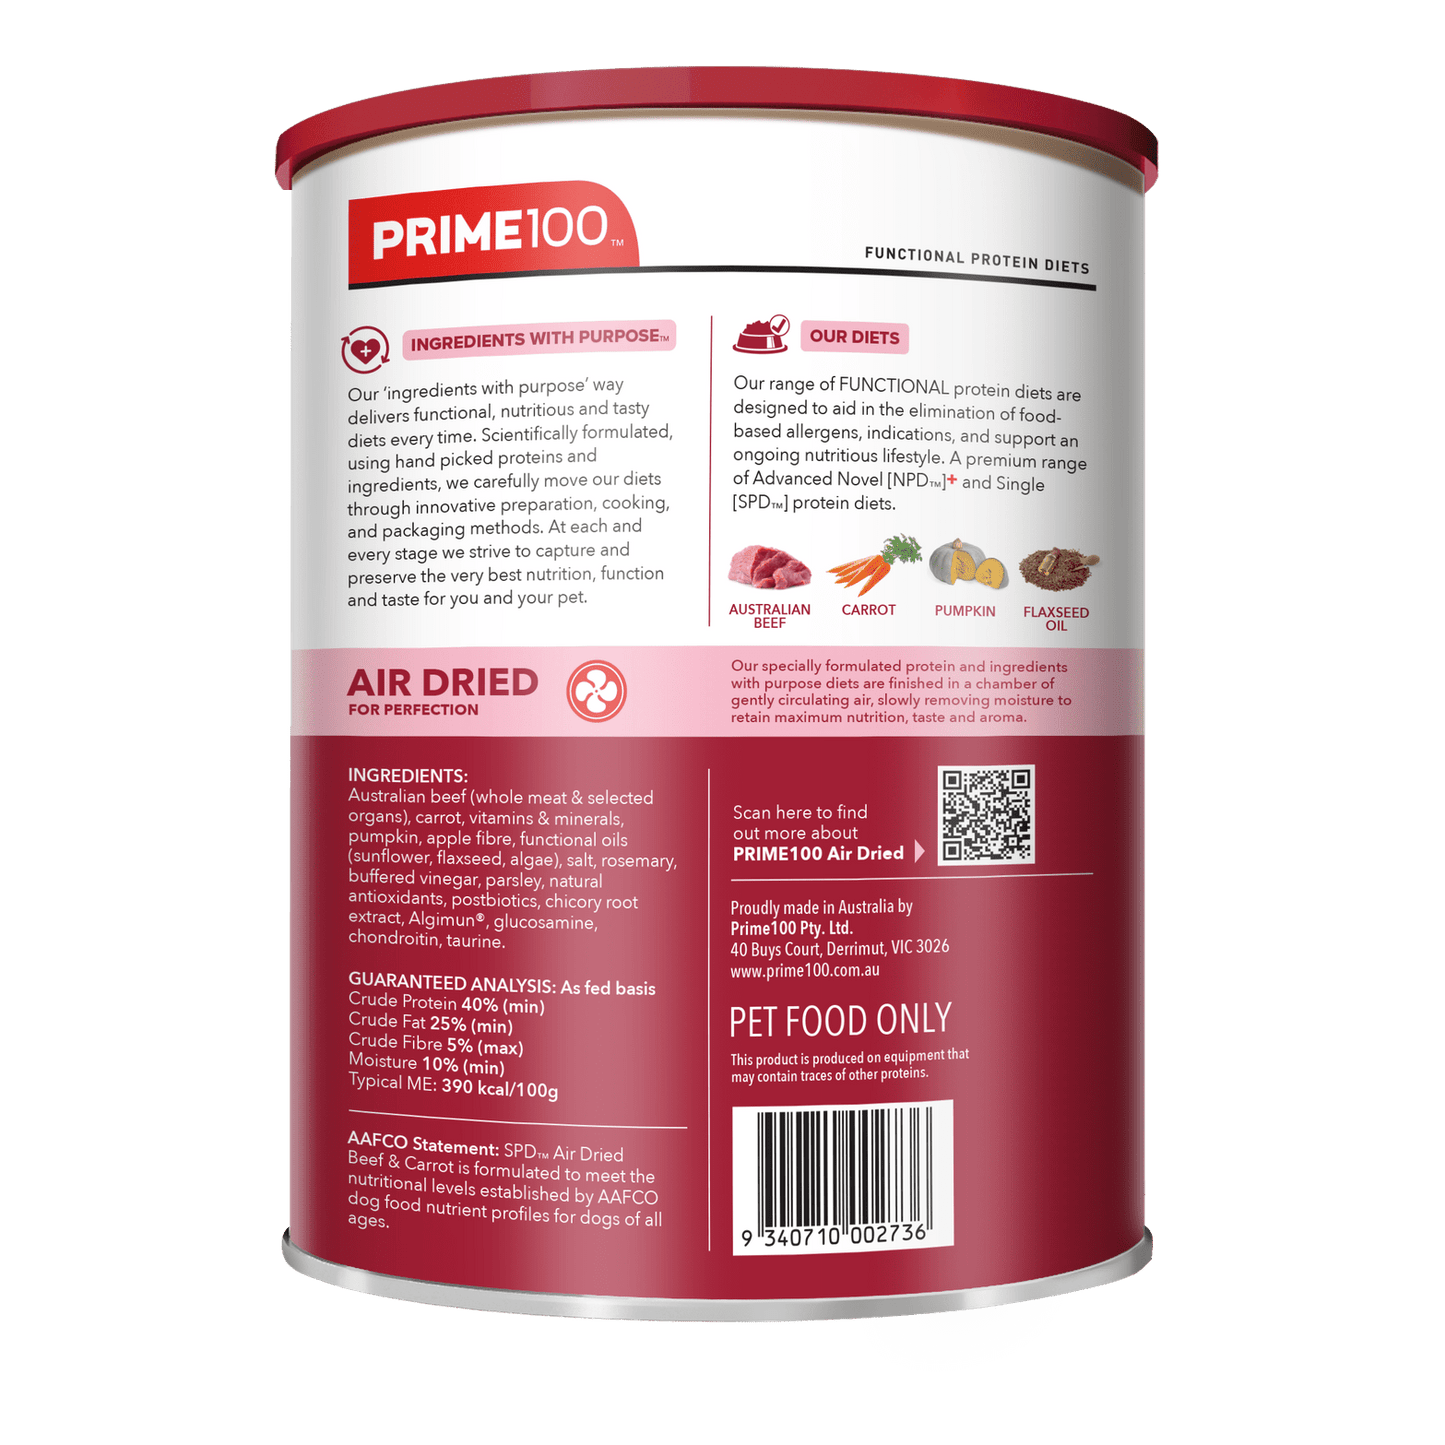 Prime100 SPD Air Dried Beef & Carrot Dry Dog Food